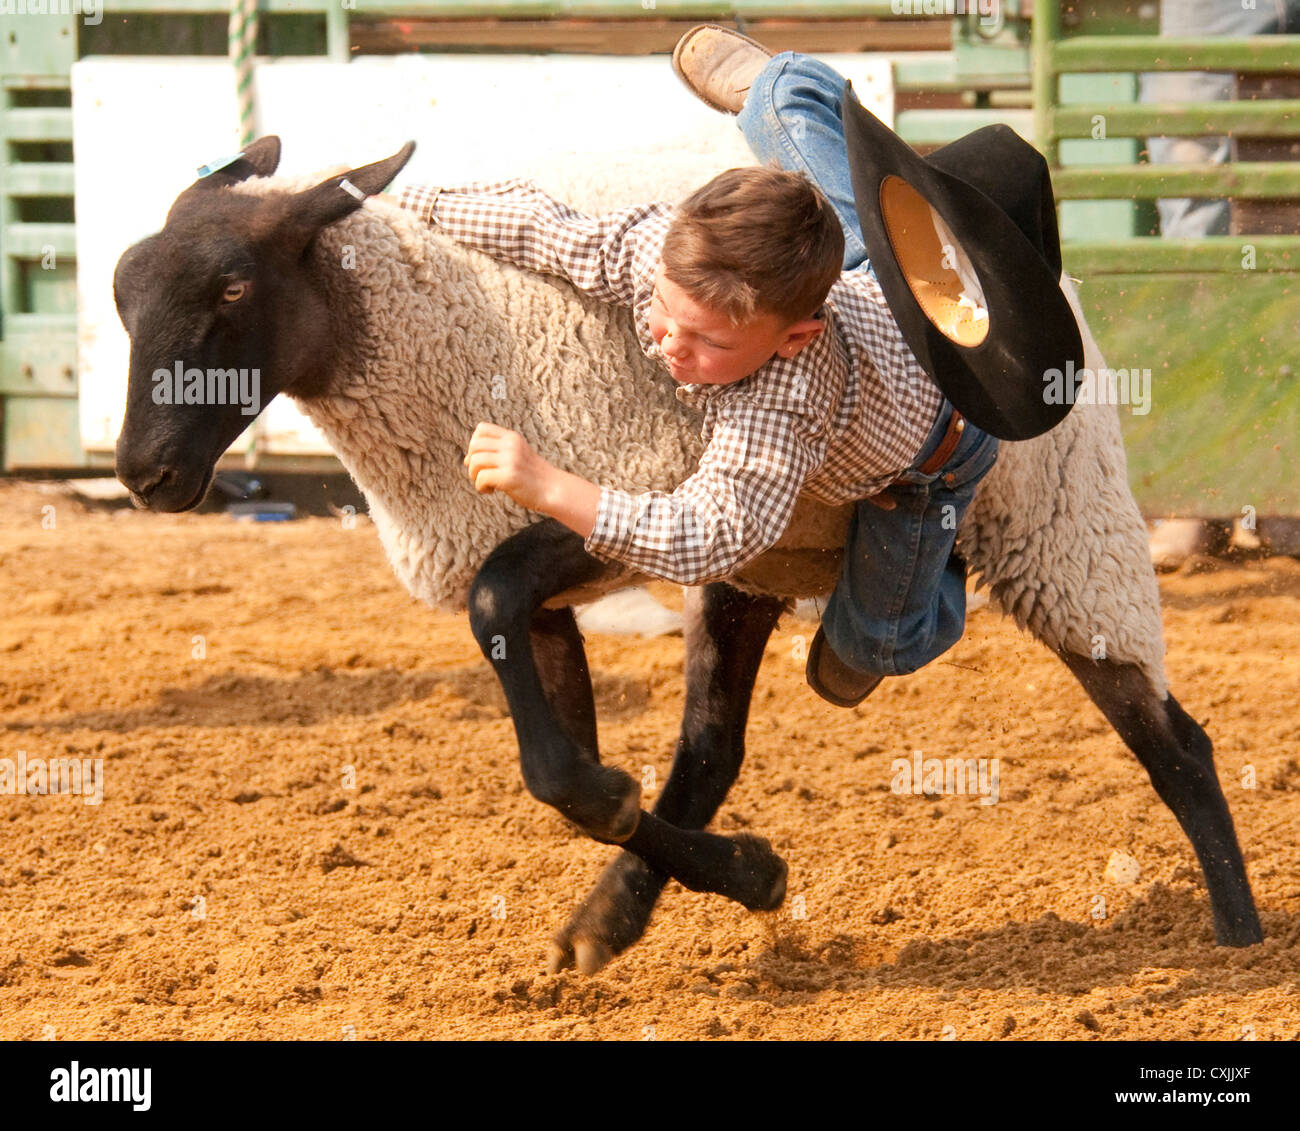 Young cowboy riding sheep during Mutton Busting event Rodeo, Bruneau, Idaho. USA Stock Photo